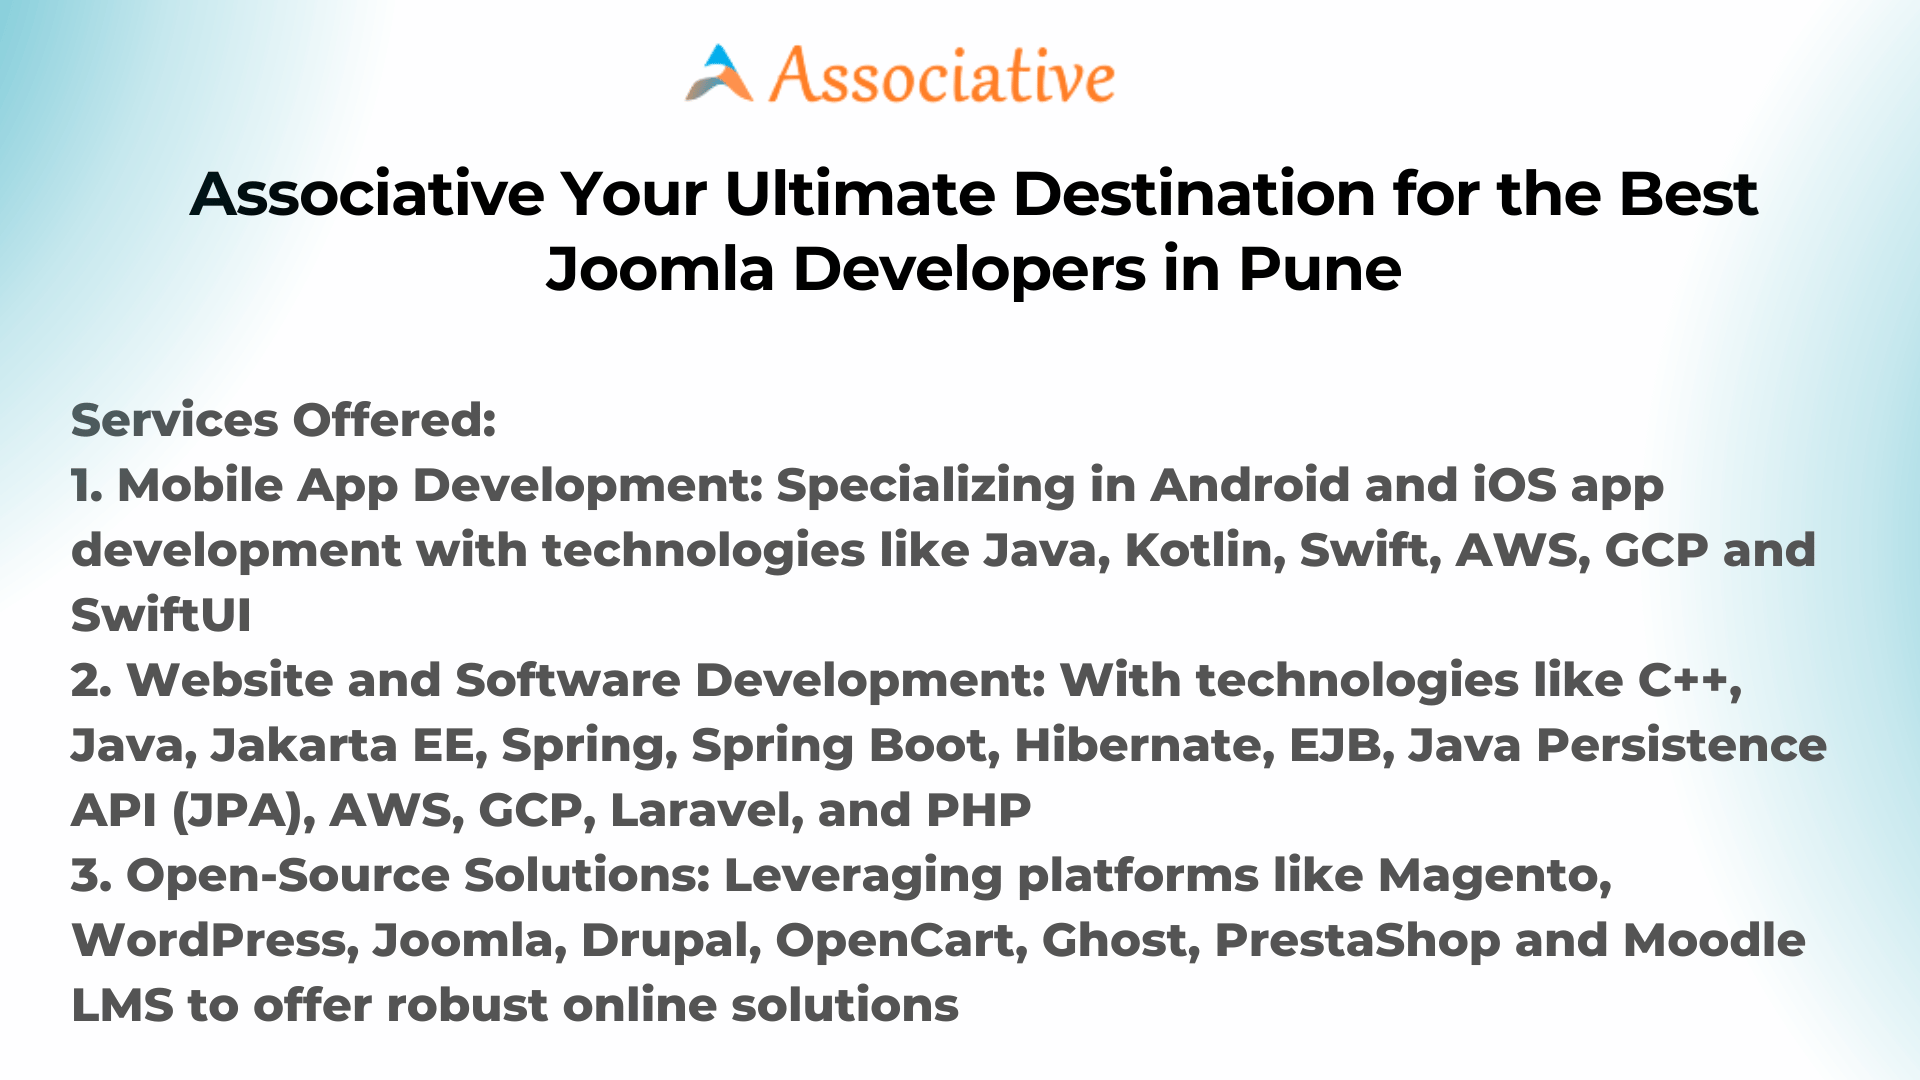 Associative Your Ultimate Destination for the Best Joomla Developers in Pune